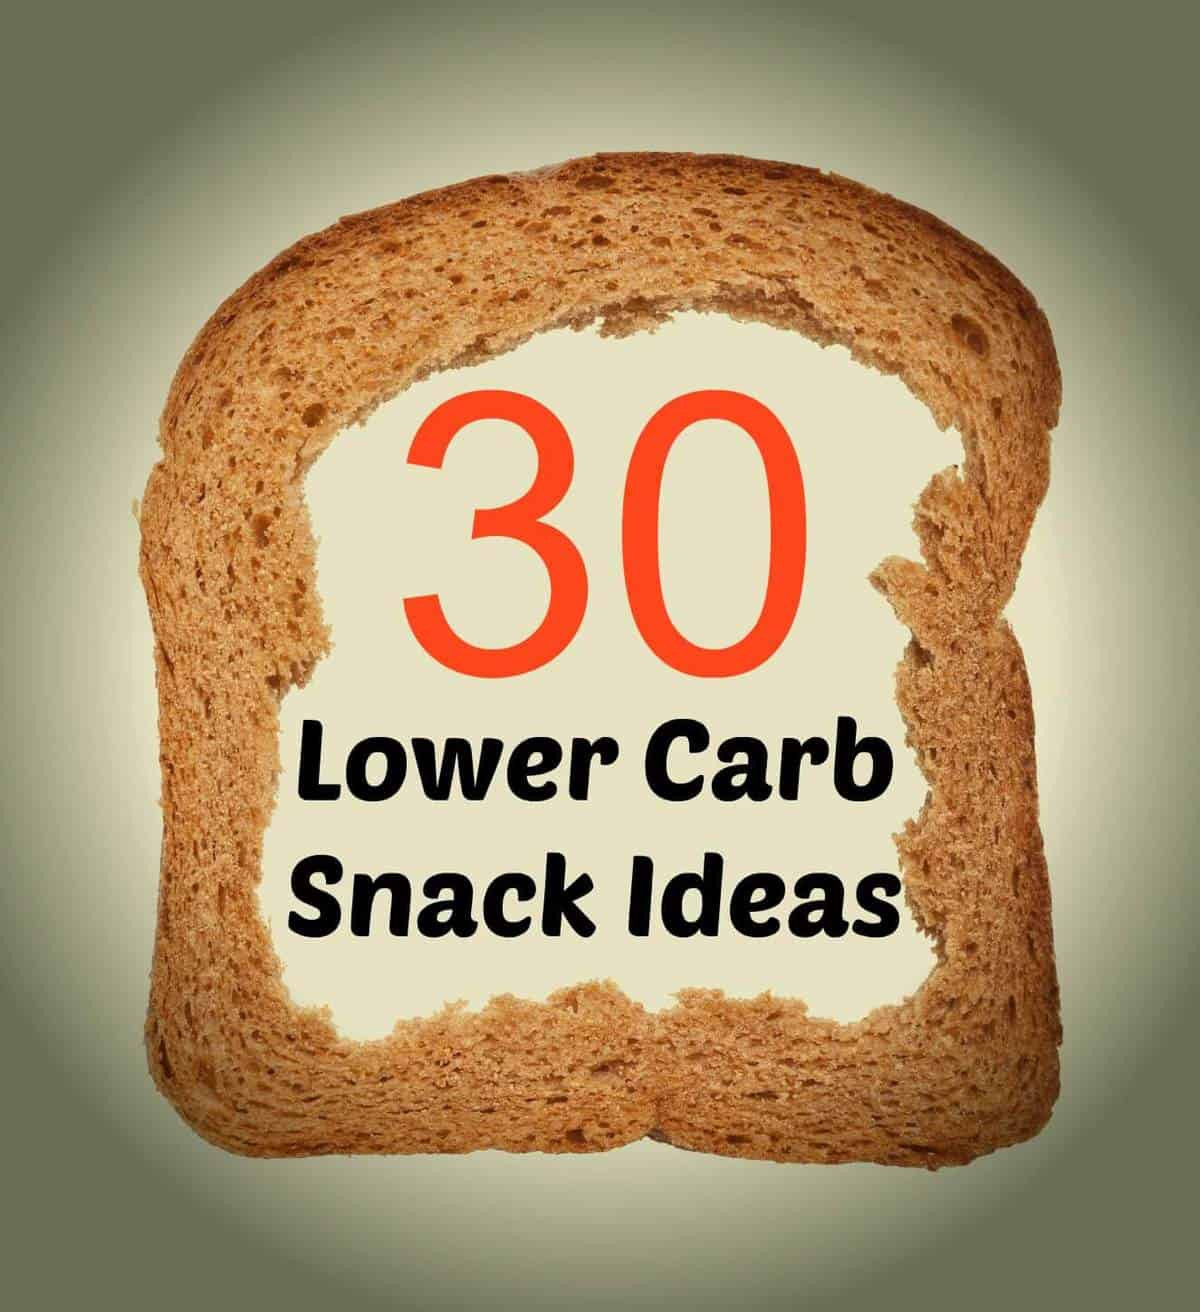 Low Carb Chips Or Crackers
 30 Lower Carb Snack Ideas